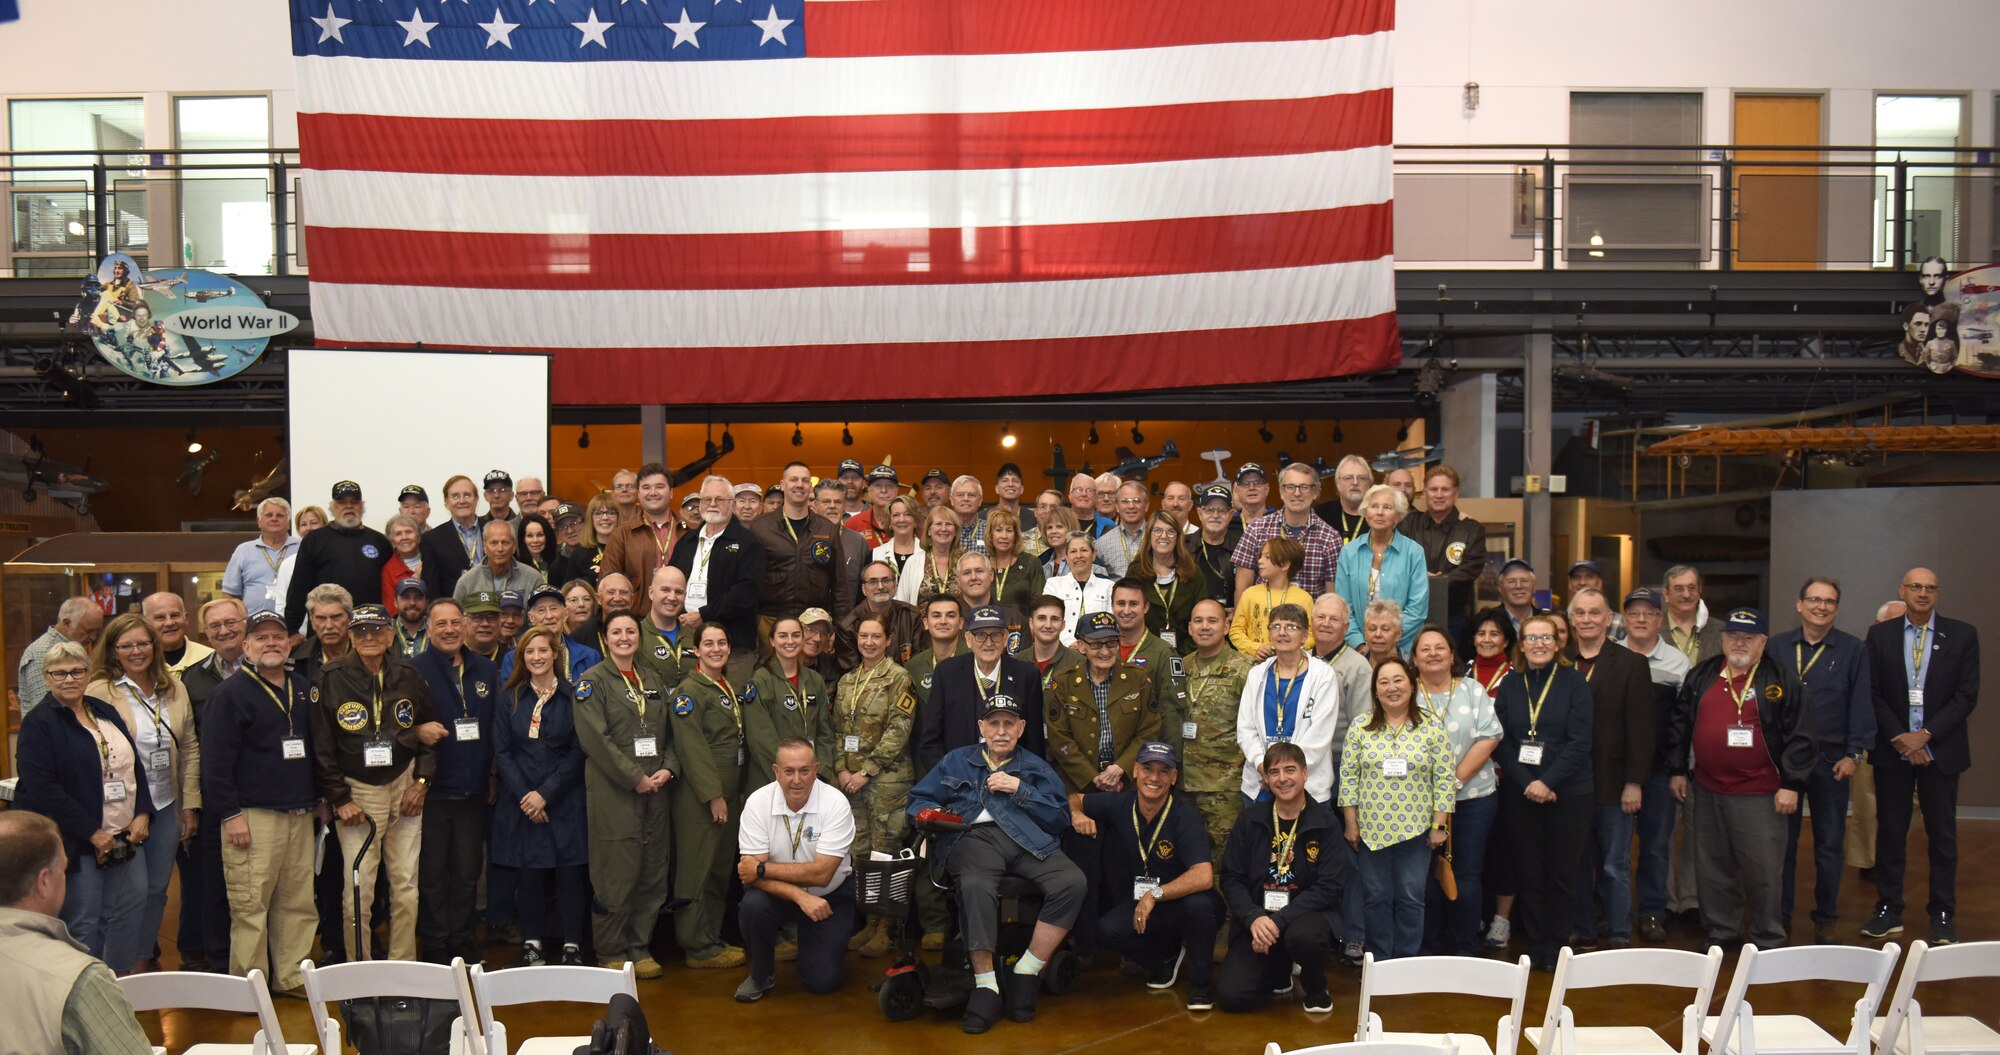 Airmen from the 100th ARW represented RAF Mildenhall and today’s Bloody Hundredth at the reunion with World War II and 100th BG veterans and their families.